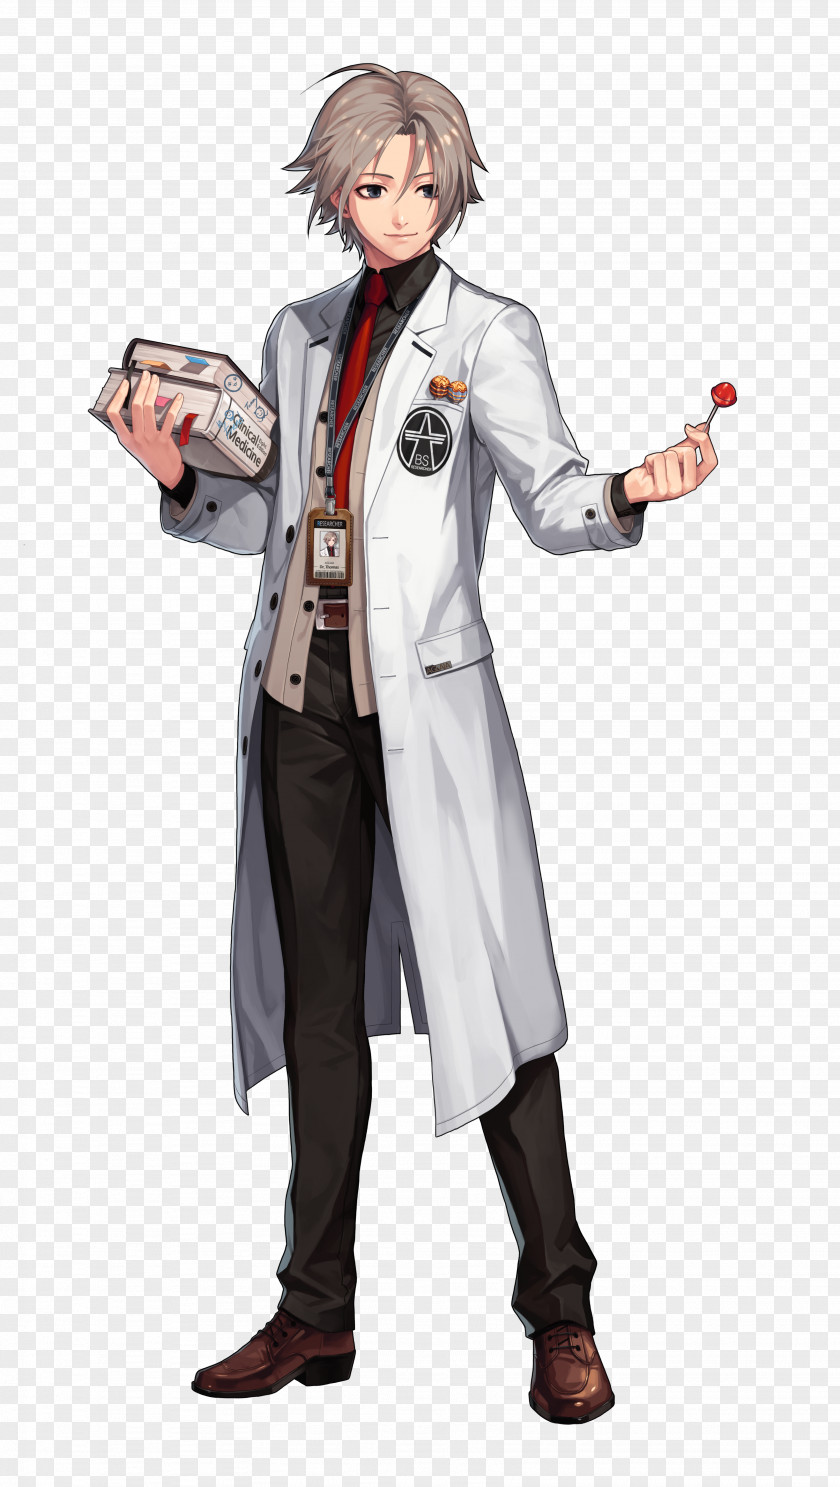 Thomas Black Survival Non-player Character Research Costume PNG